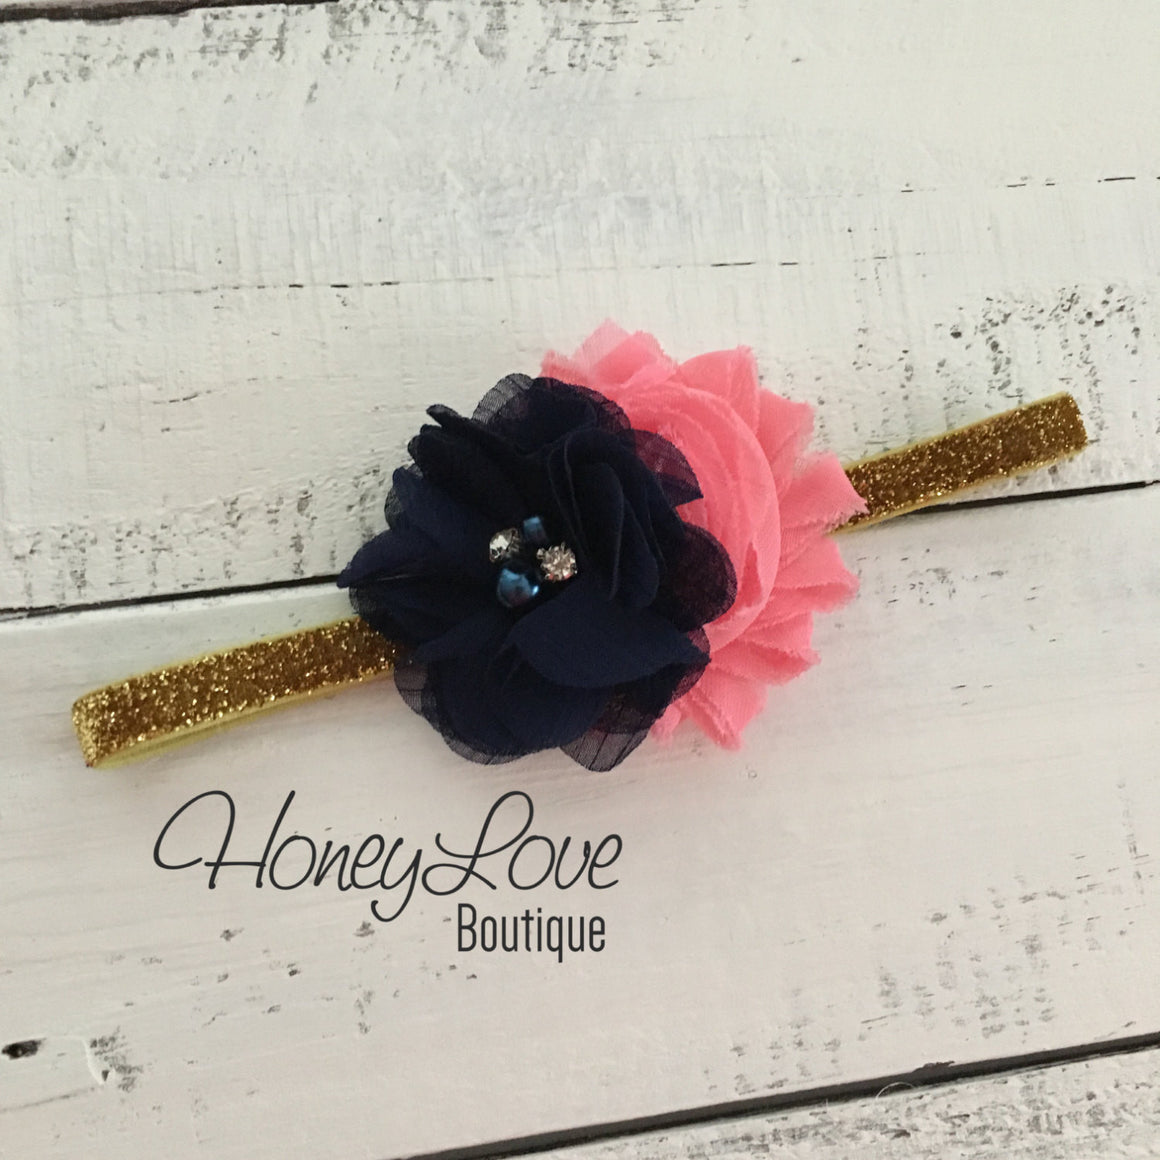 PERSONALIZED Name Outfit - Navy Blue and Gold Glitter - Coral pink shabby flower embellished tutu skirt bloomers - HoneyLoveBoutique